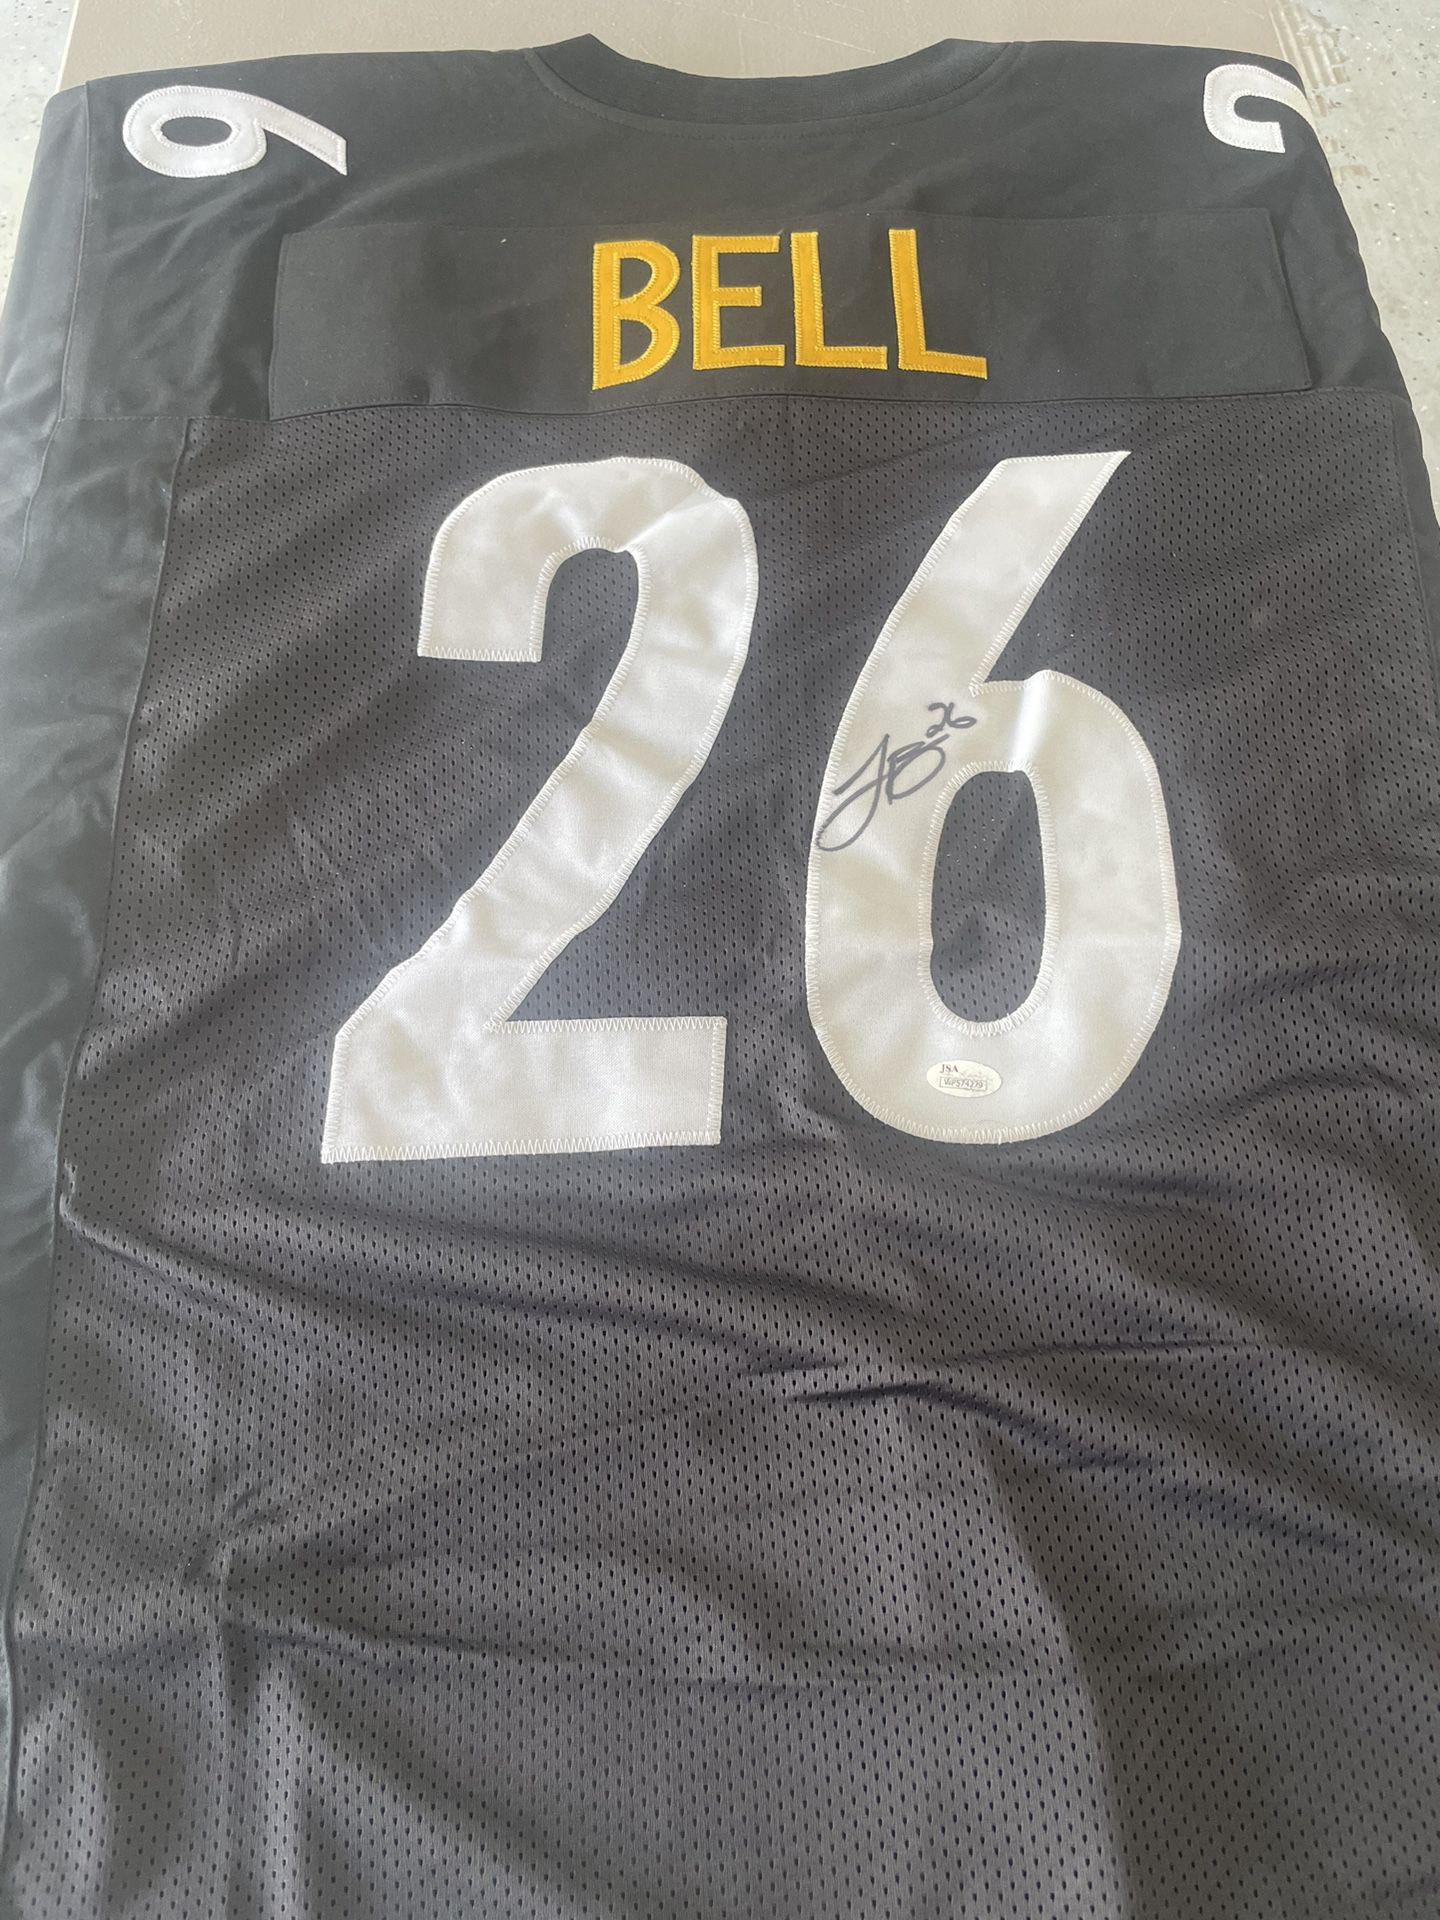 Steeler Laveon Bell Signed Stitched Jersey